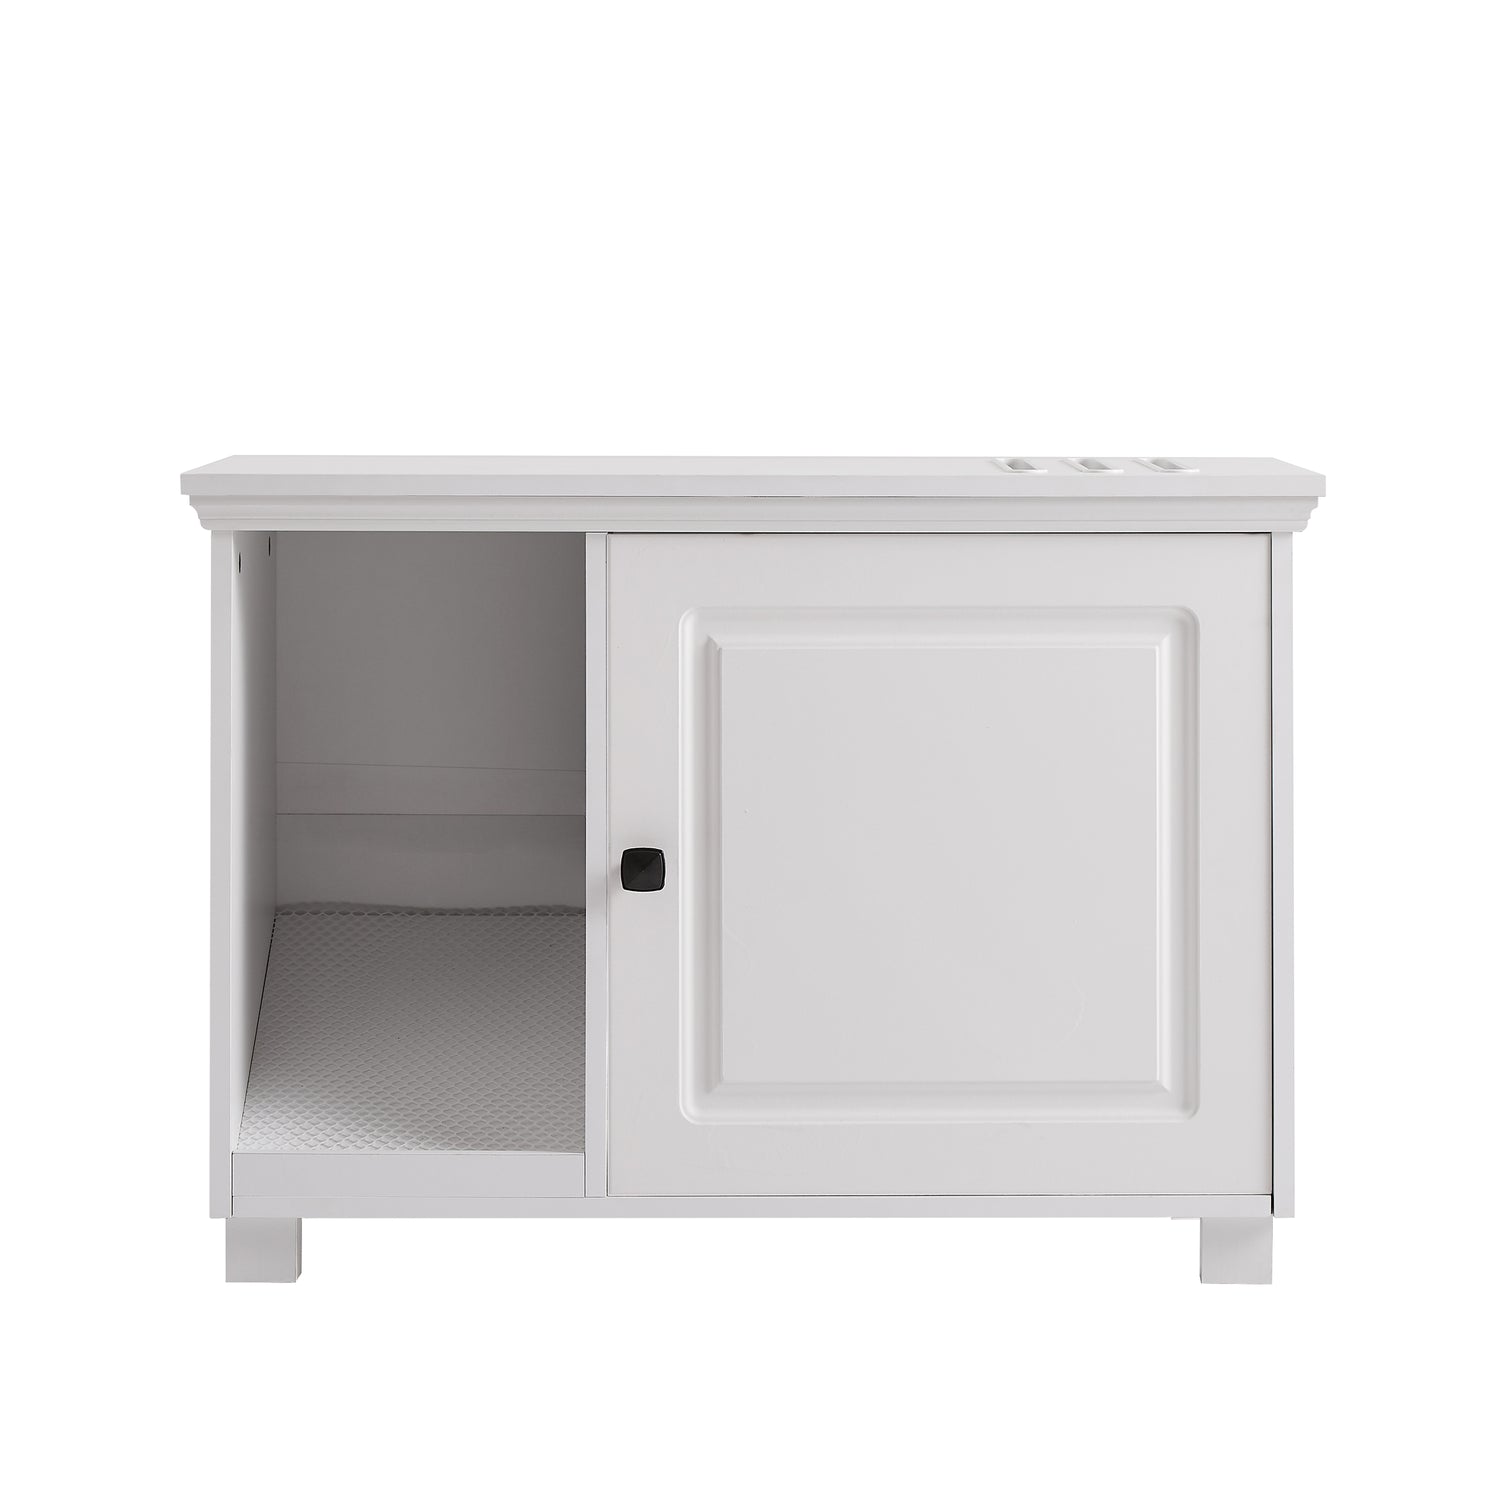 Roomfitters Cat Washroom Storage Bench with Cat Litter Box Enclosure Furniture in White Finish